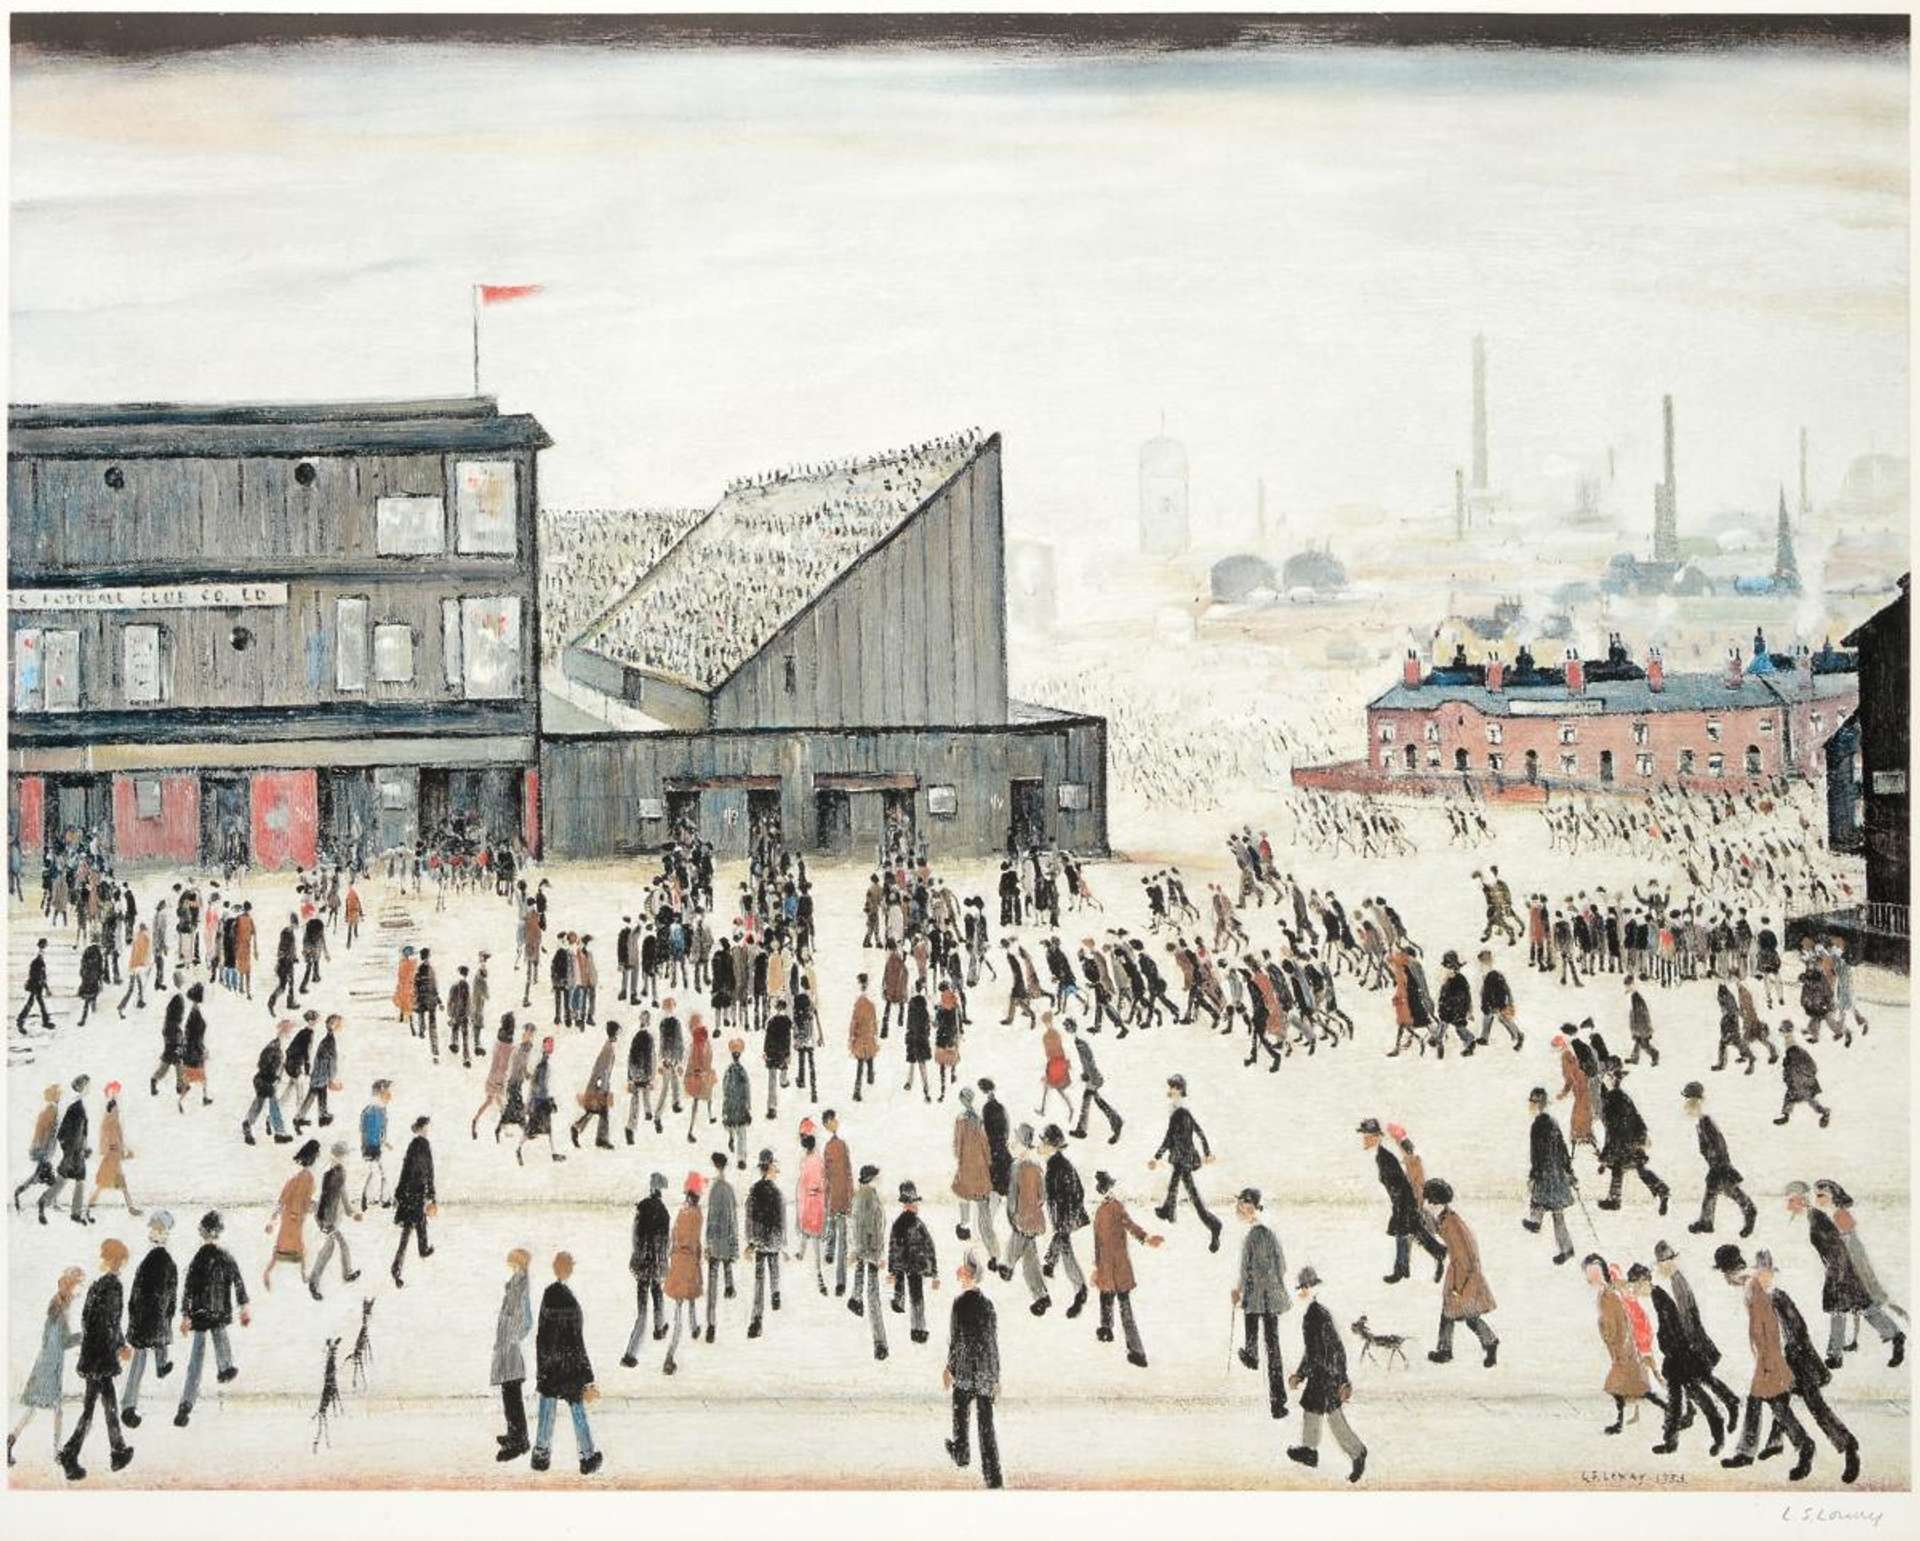 The Beautiful Game: A Guide To Lowry’s Football Matches